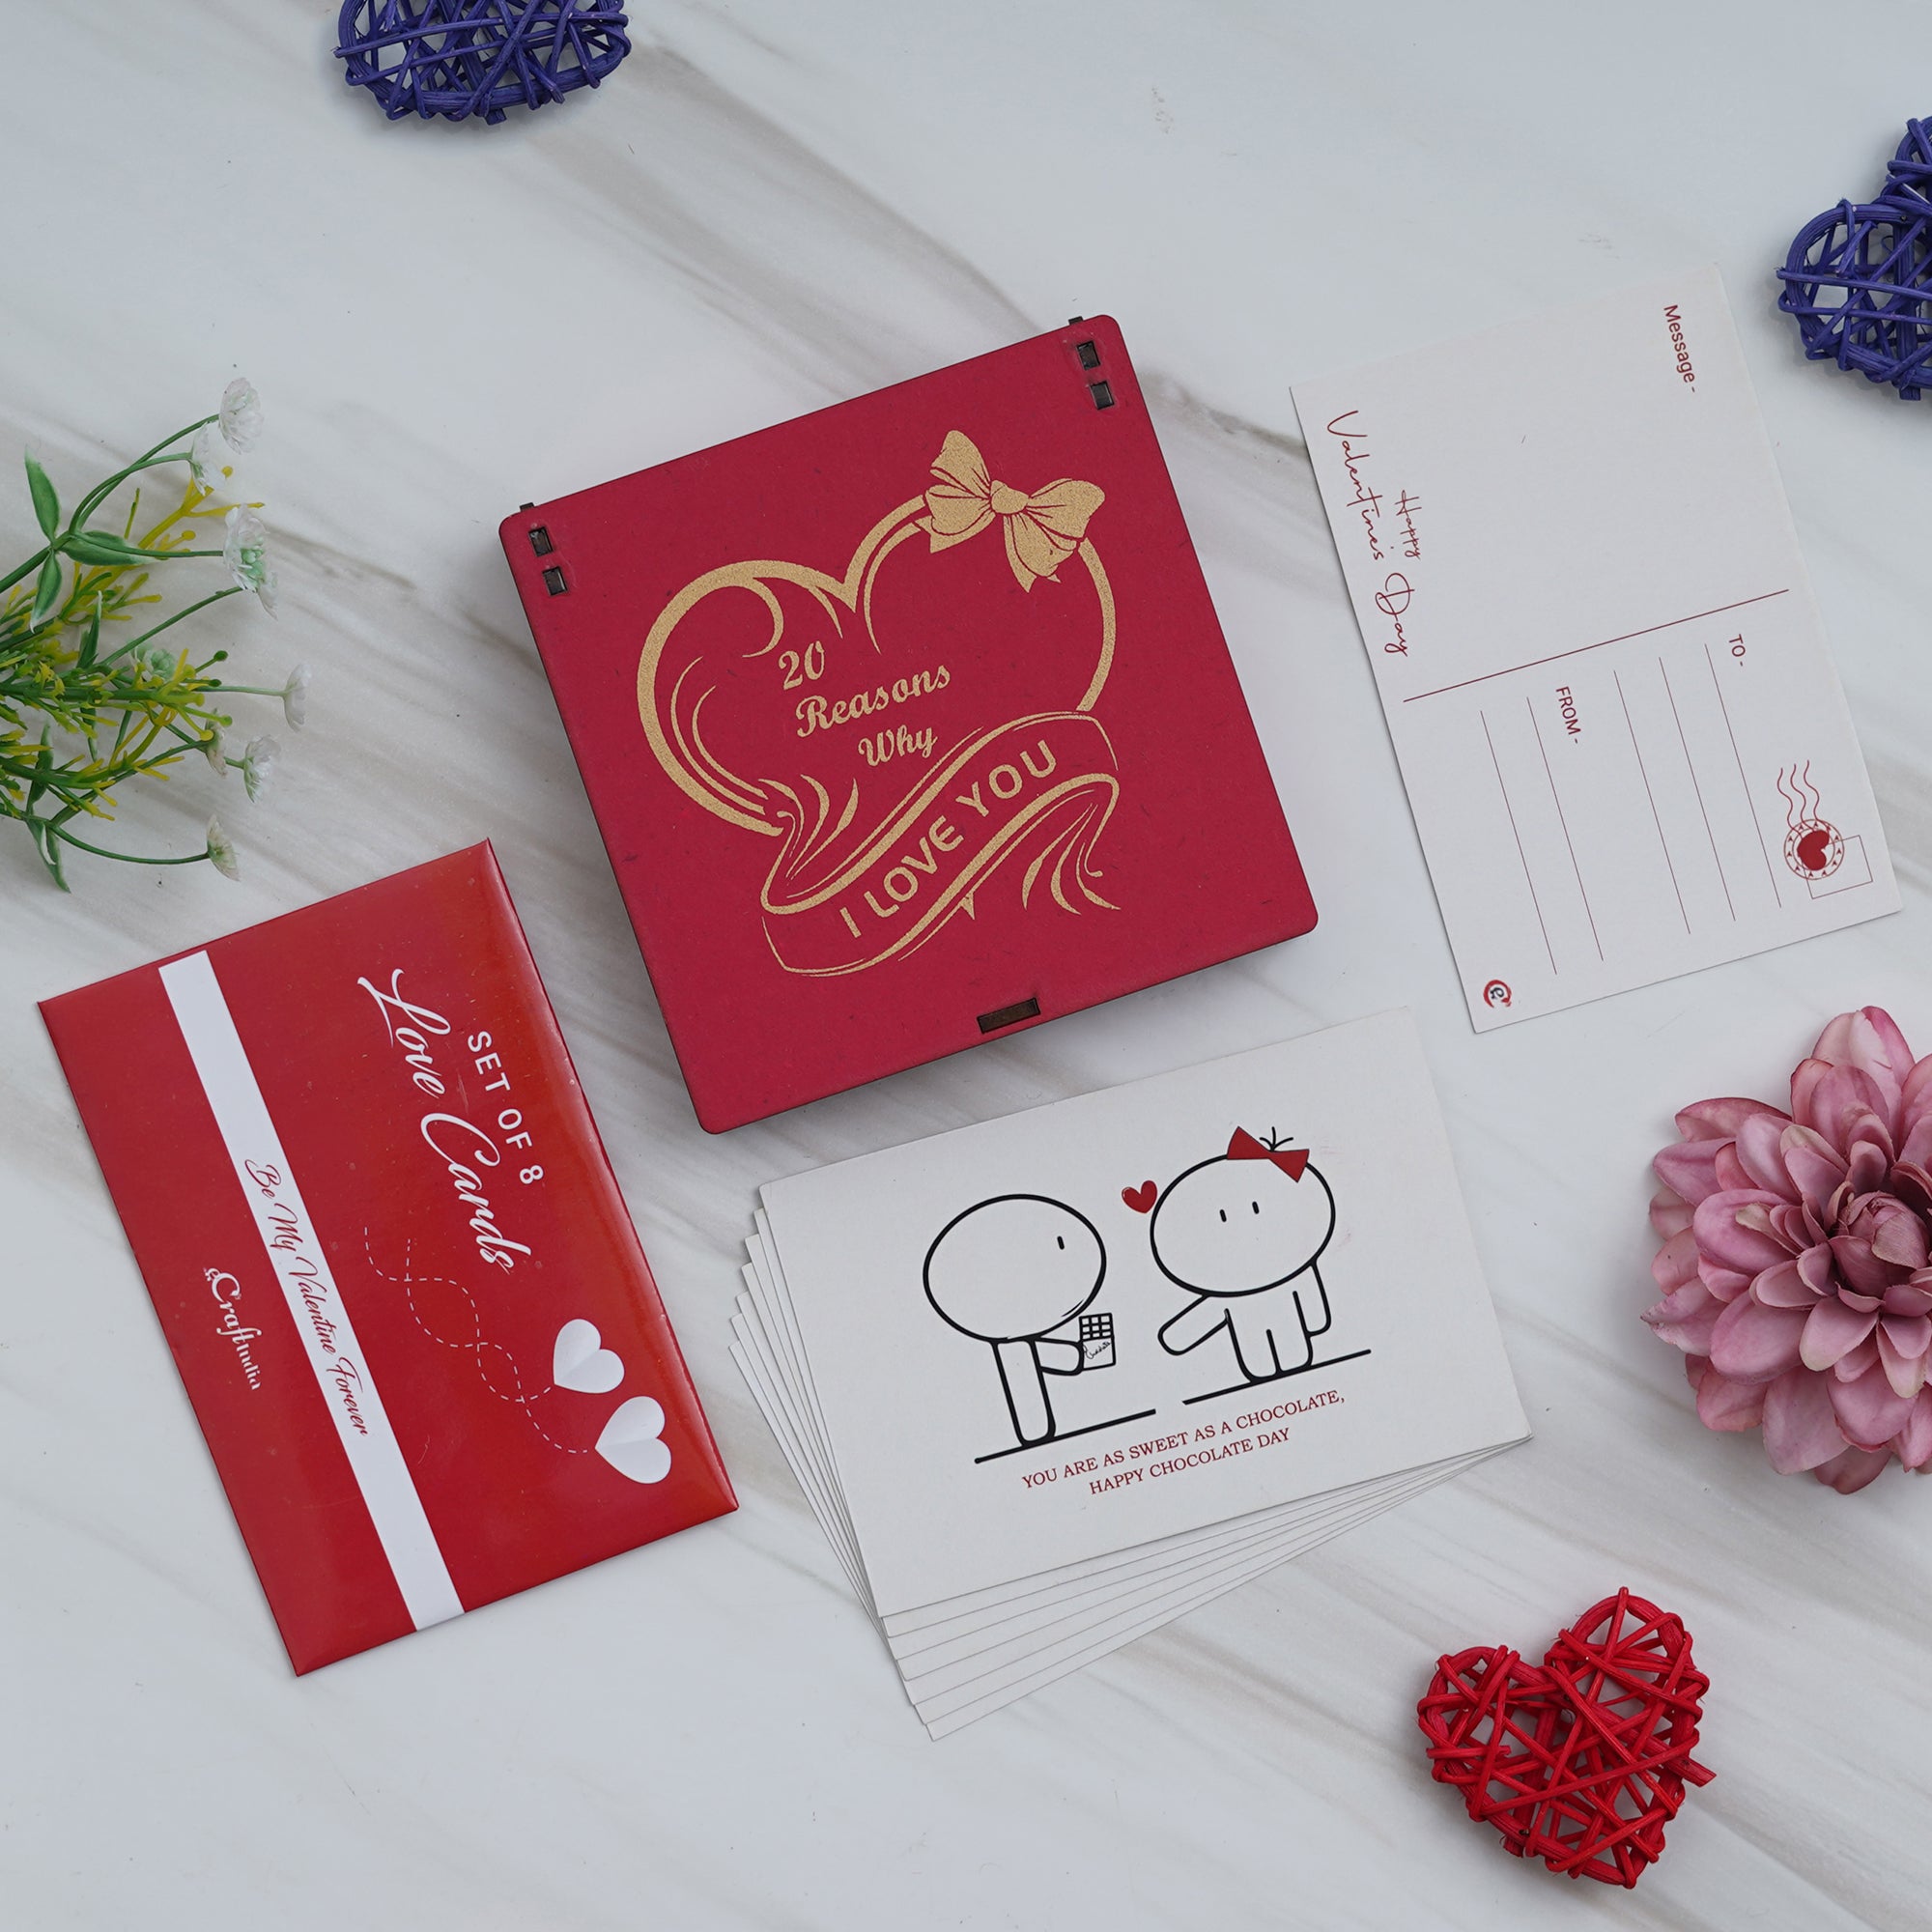 Valentine Combo of Set of 8 Love Post Cards Gift Cards Set, "20 Reasons Why I Love You" Printed on Little Red Hearts Decorative Wooden Gift Set Box